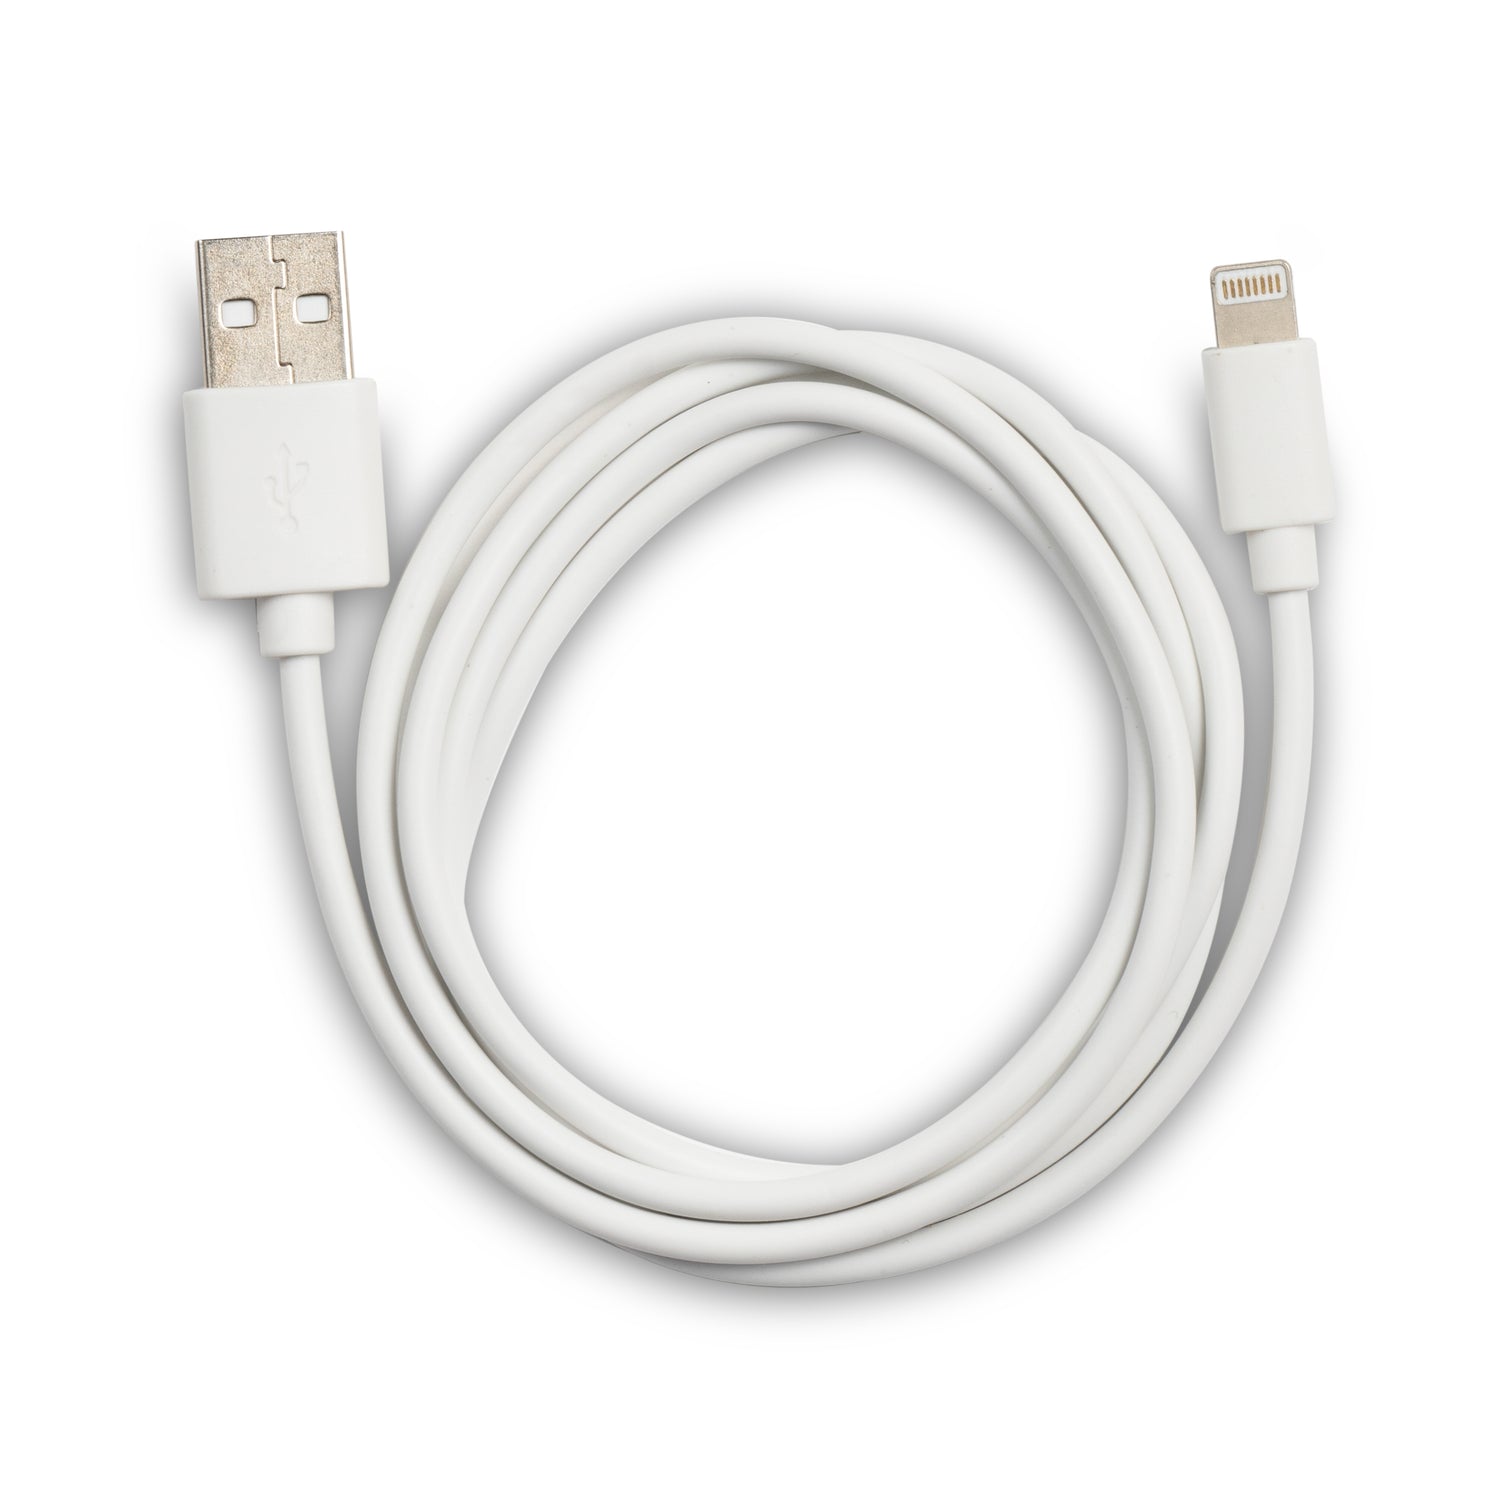 ''PVC Lightning to USB-A Charging Cable ''''1m, 3ft'''' (20 Count)''